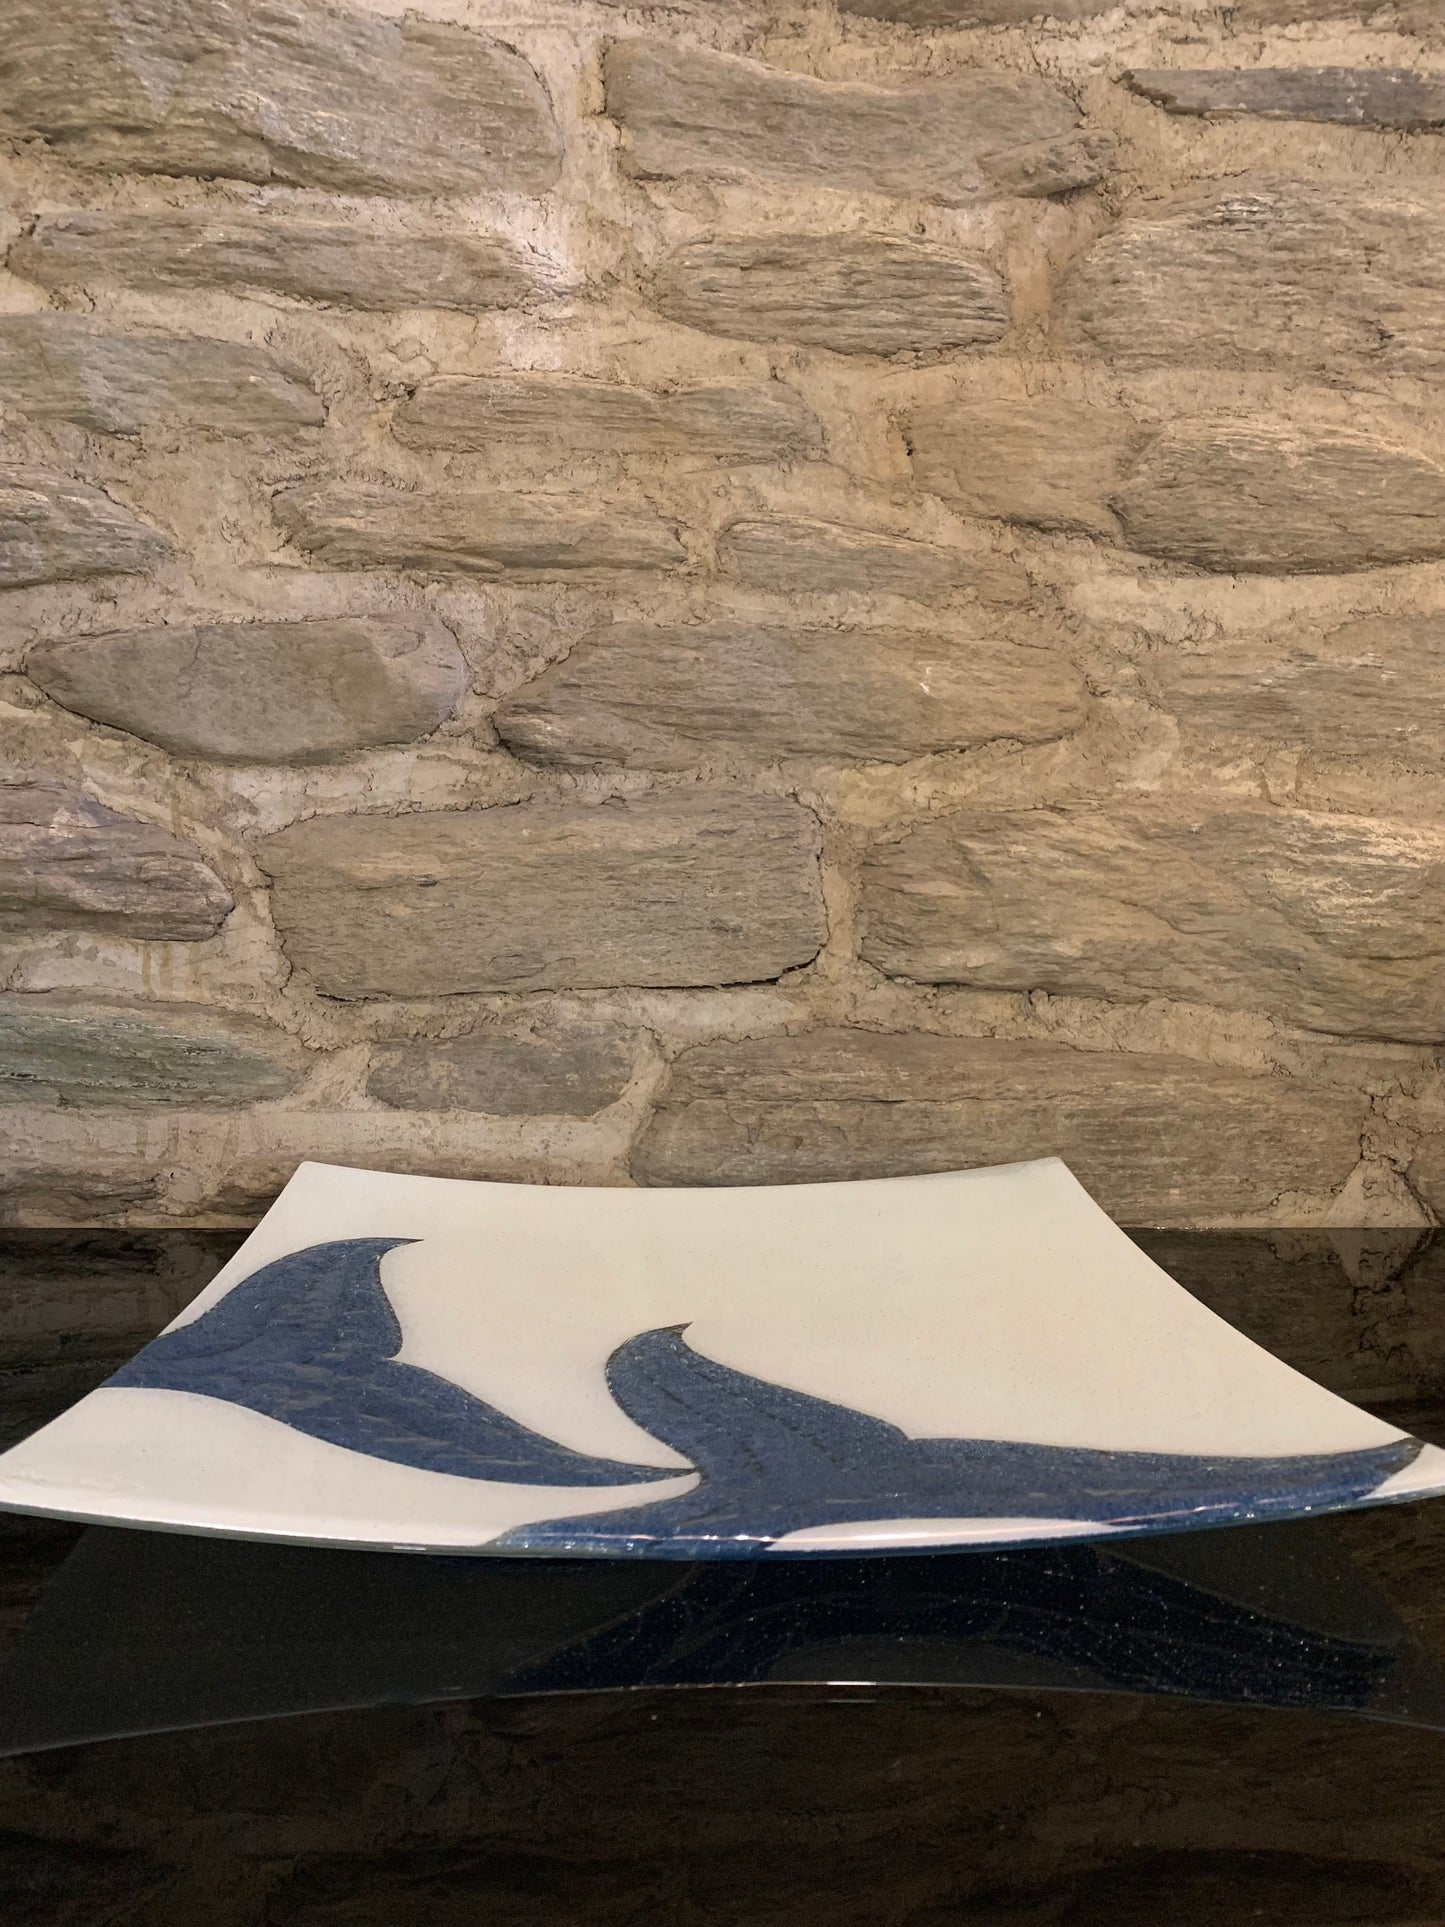 Fused Glass Platter by Maori Boy - Ika Moana (Whale Tail) Design (Light Blue and White) 40cm